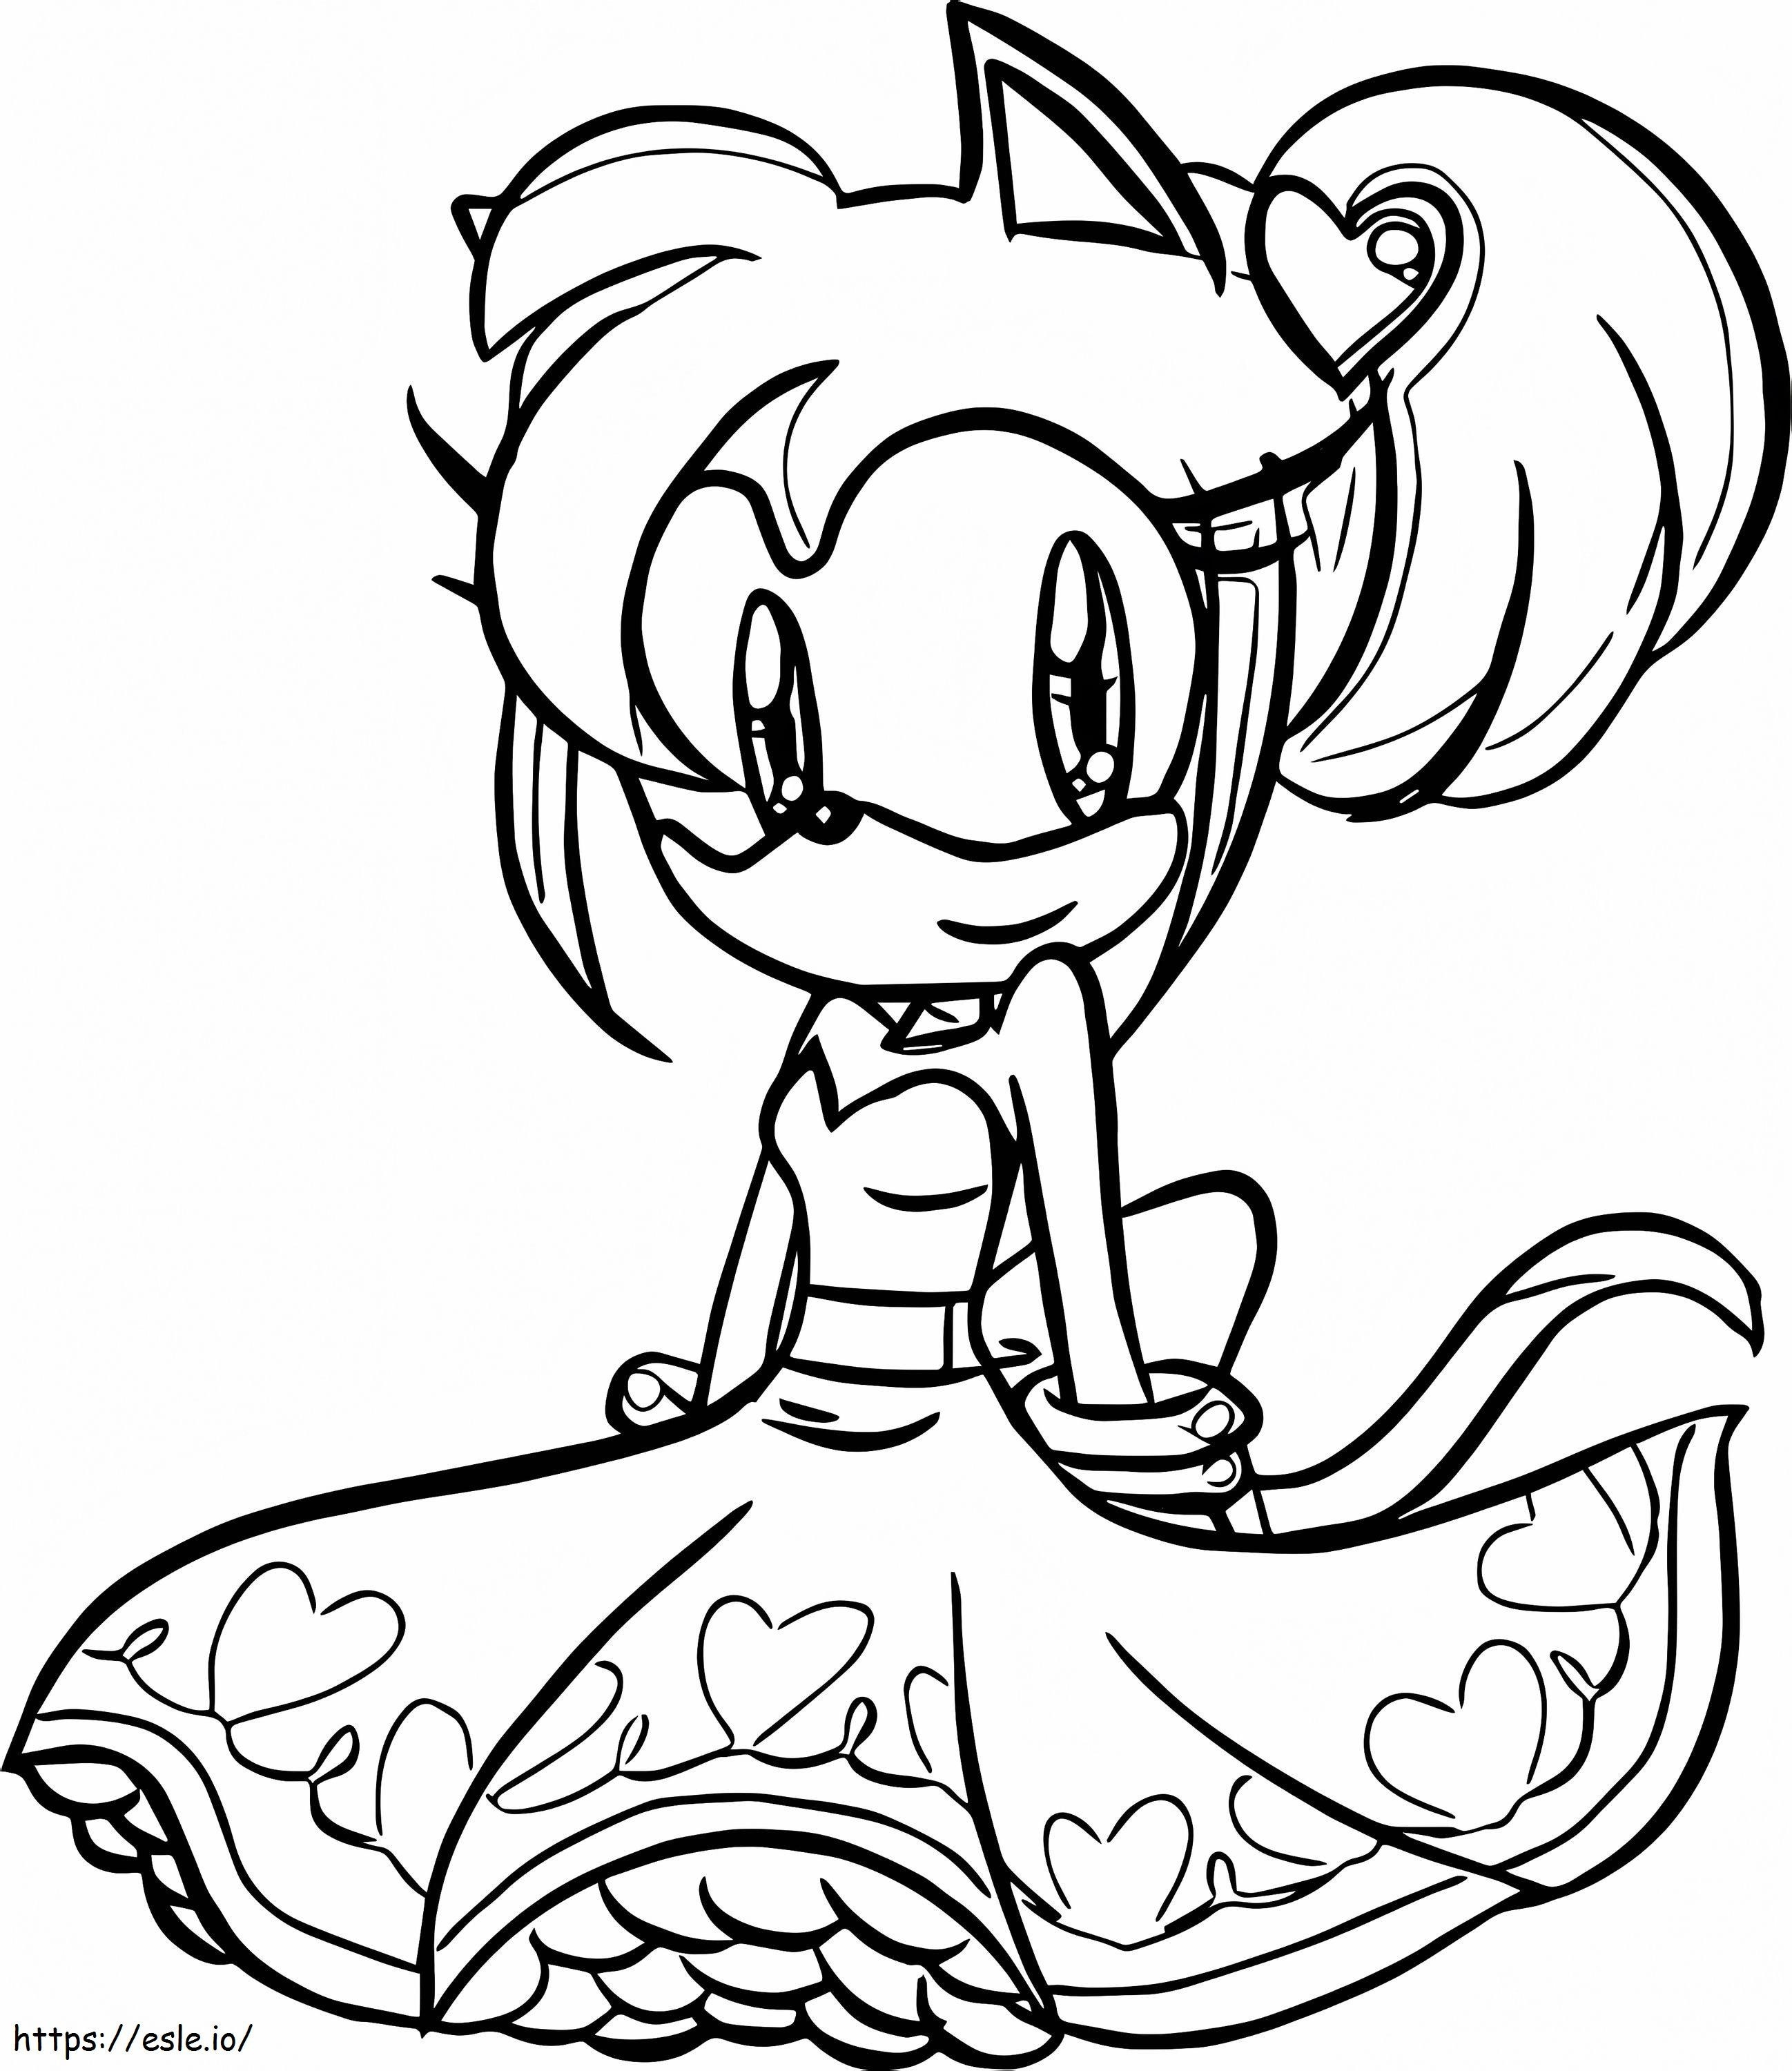 Amy Rose Is Cute coloring page